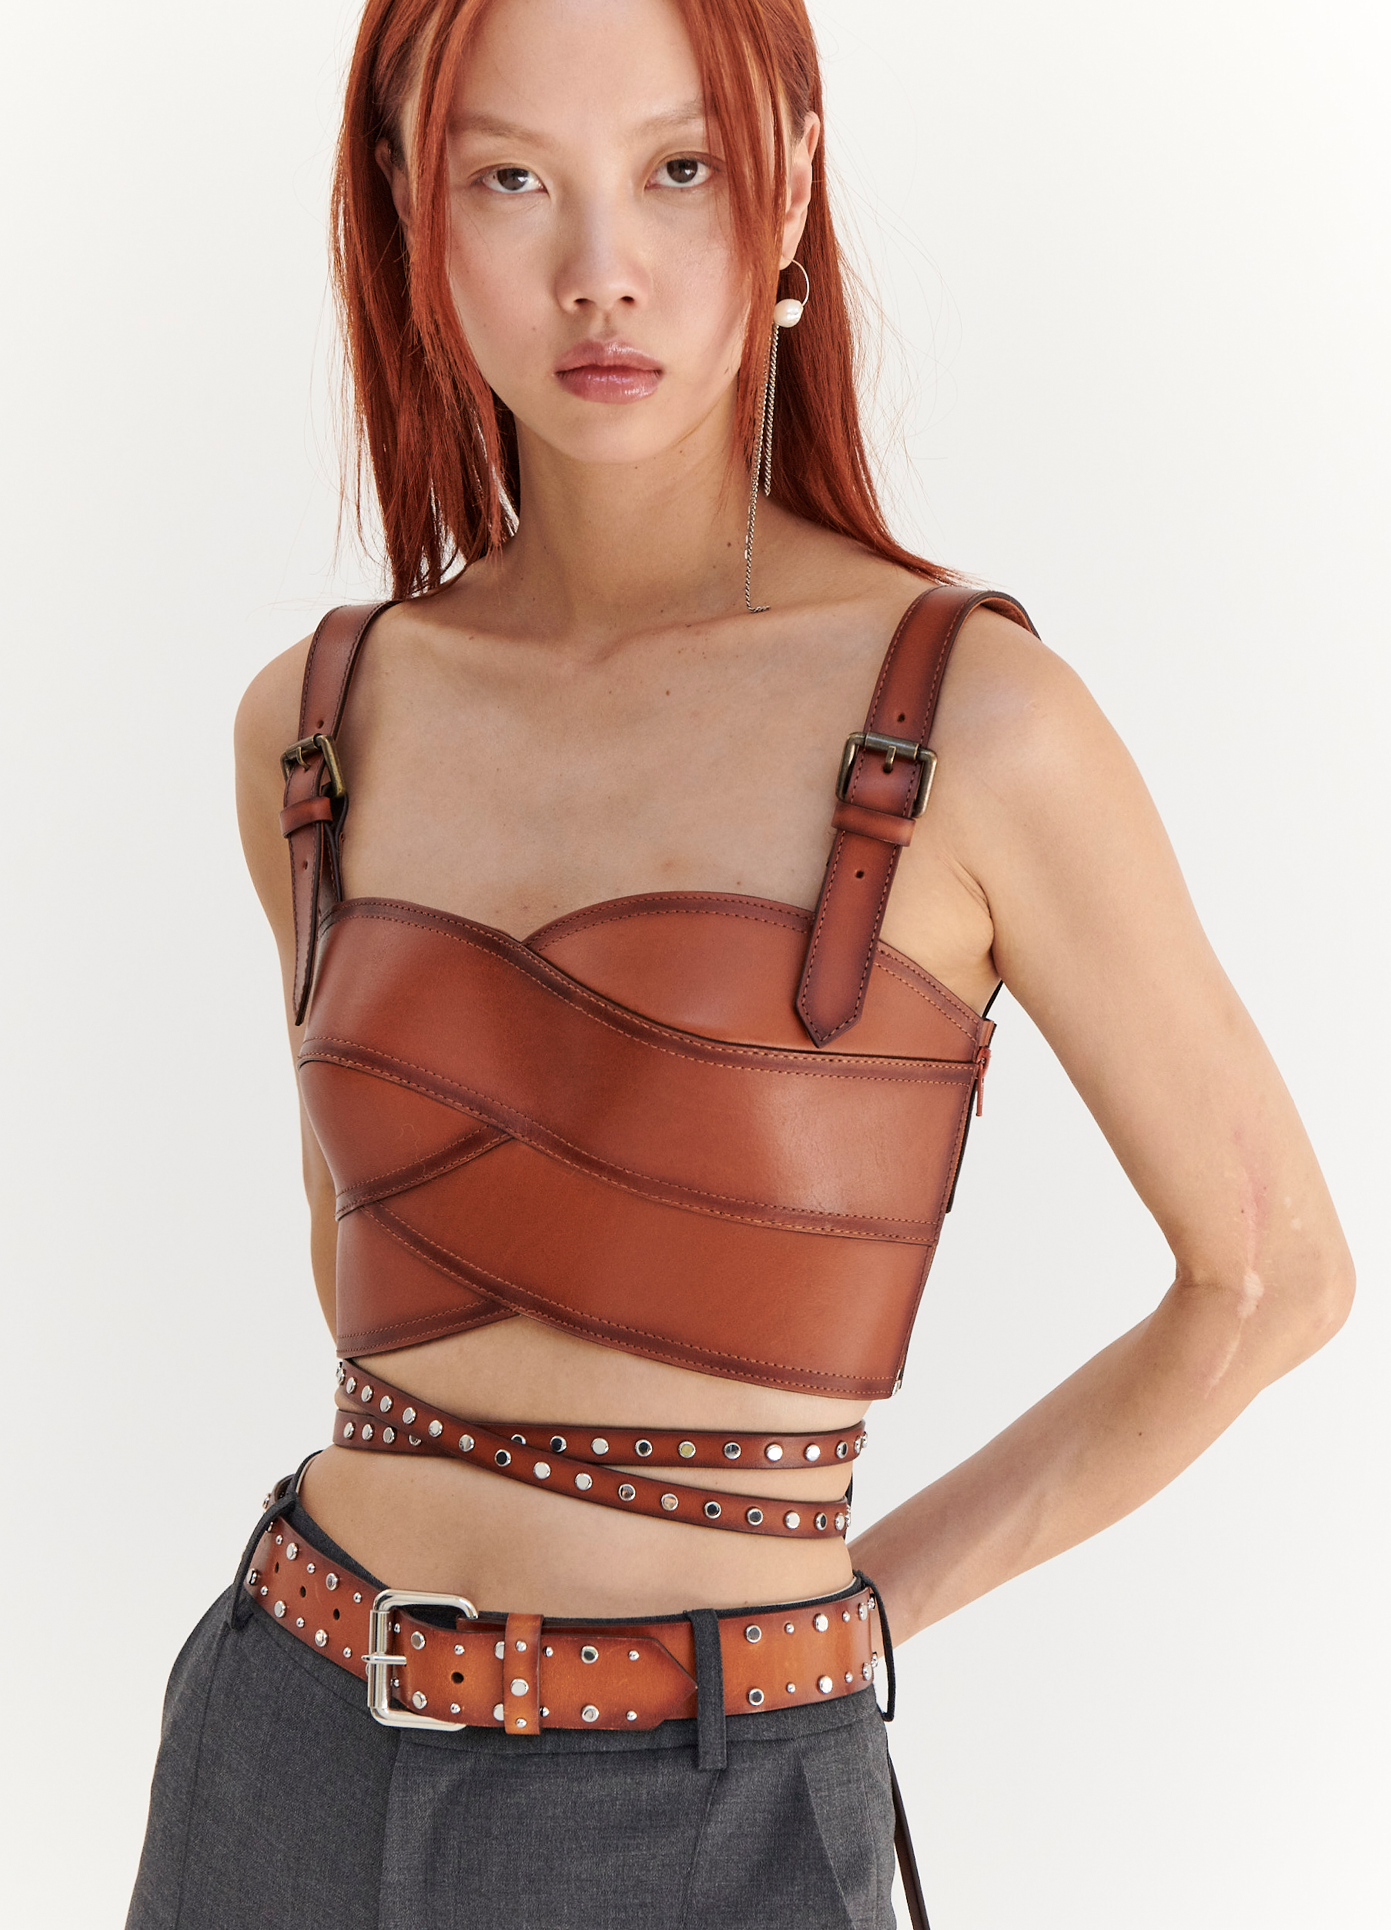 Leather corset 2-109 : Crazy-Outfits - webshop for leather clothing, shoes  and more.